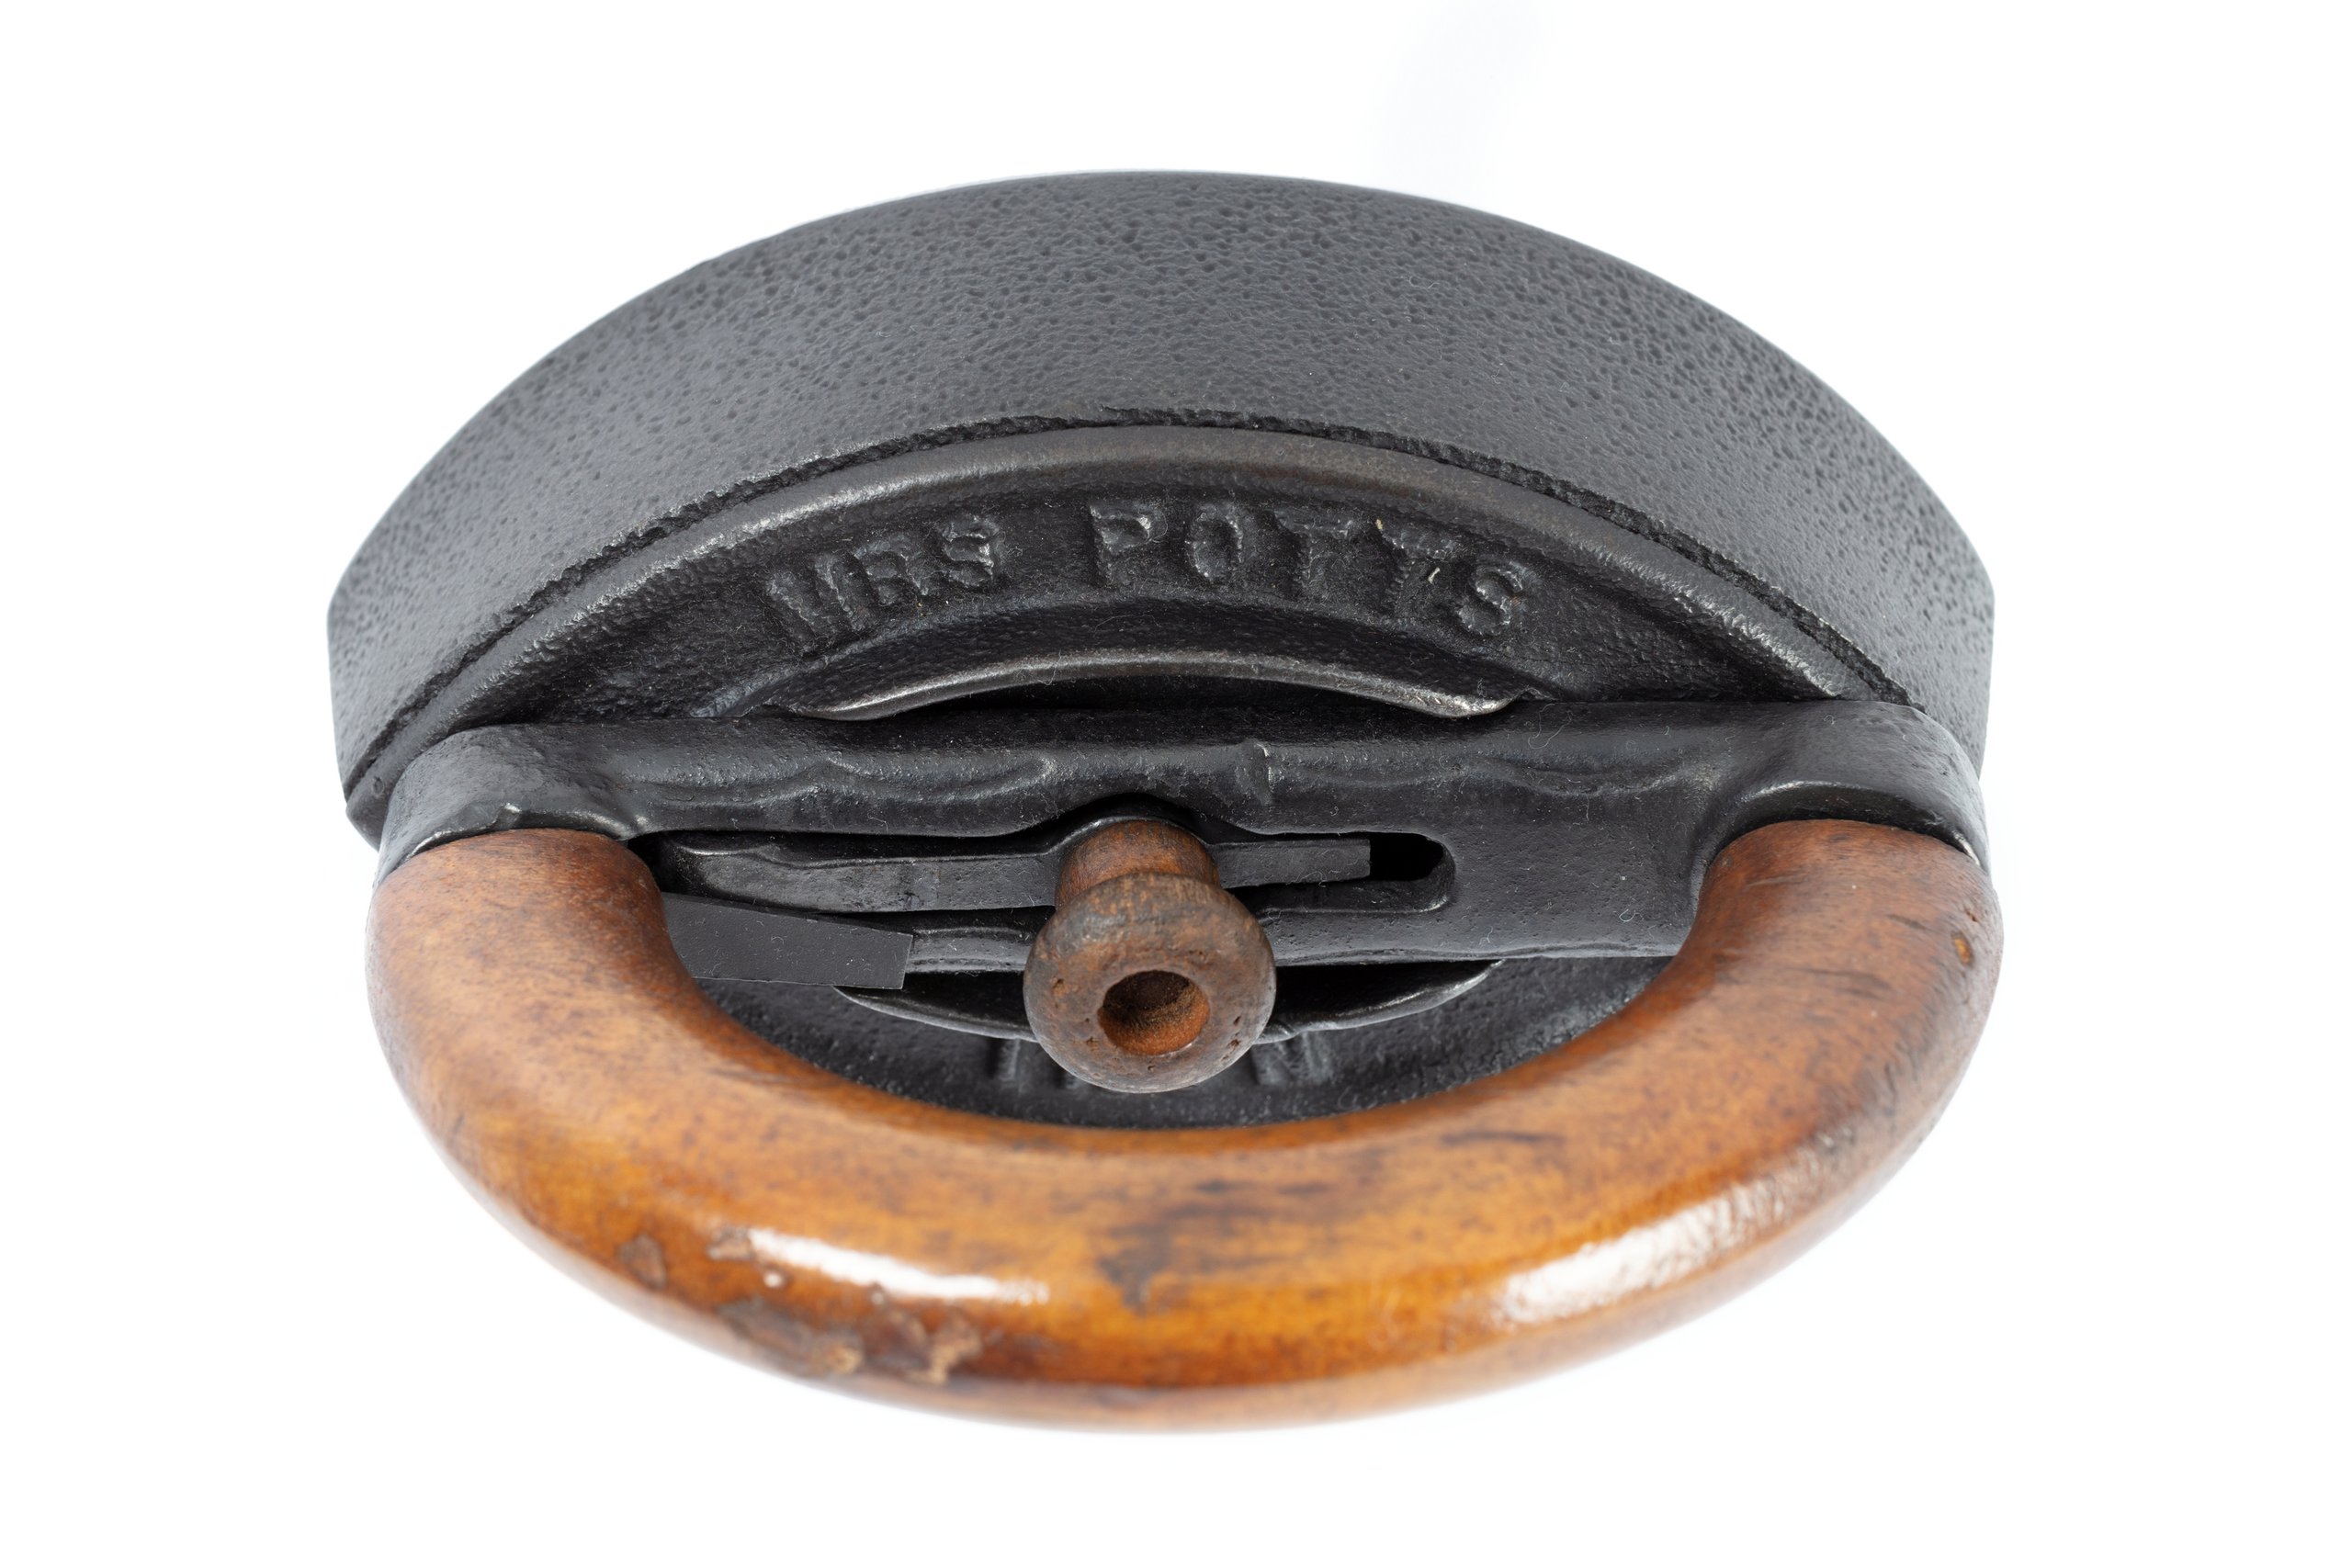 'Mrs Potts' Cold Handle Sad Irons' and trivet by Enterprise Manufacturing Co